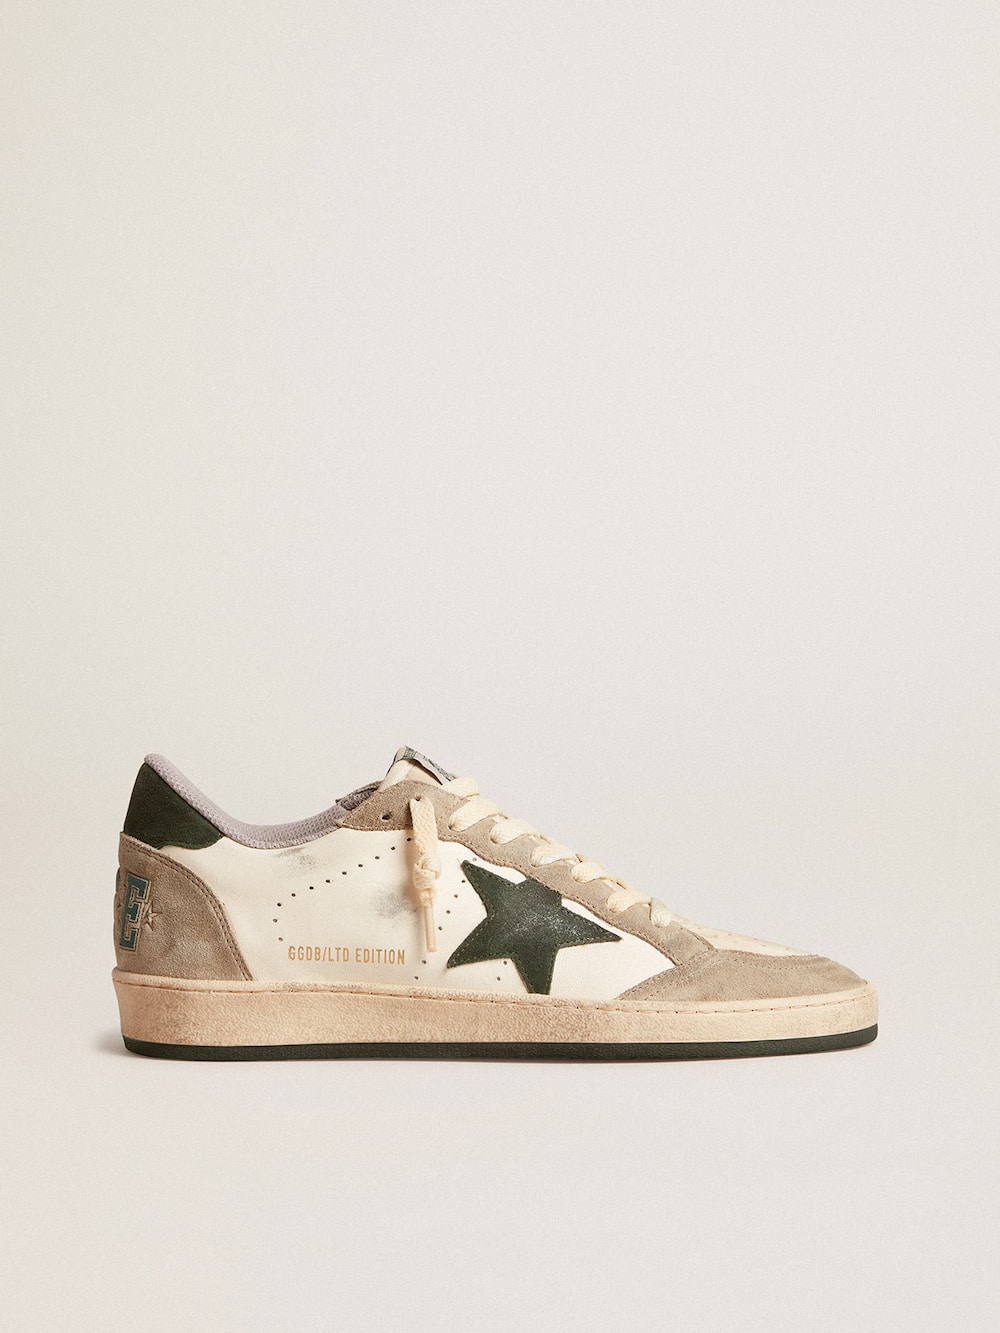 Golden Goose - Men's Ball Star LTD in nappa with green star and dove-gray suede inserts in 